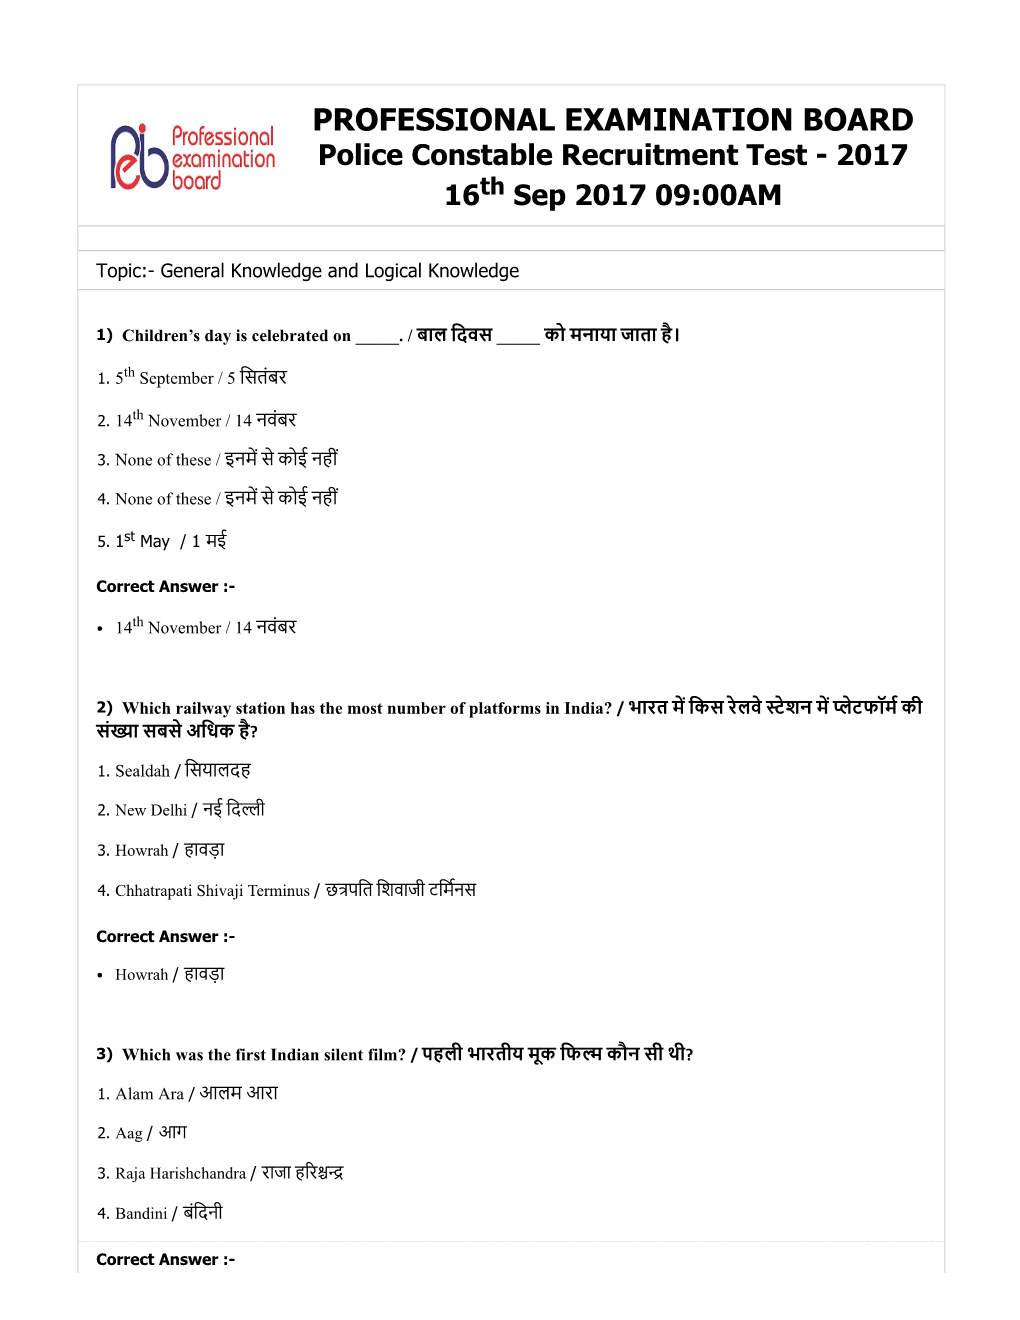 PROFESSIONAL EXAMINATION BOARD Police Constable Recruitment Test - 2017 16Th Sep 2017 09:00AM